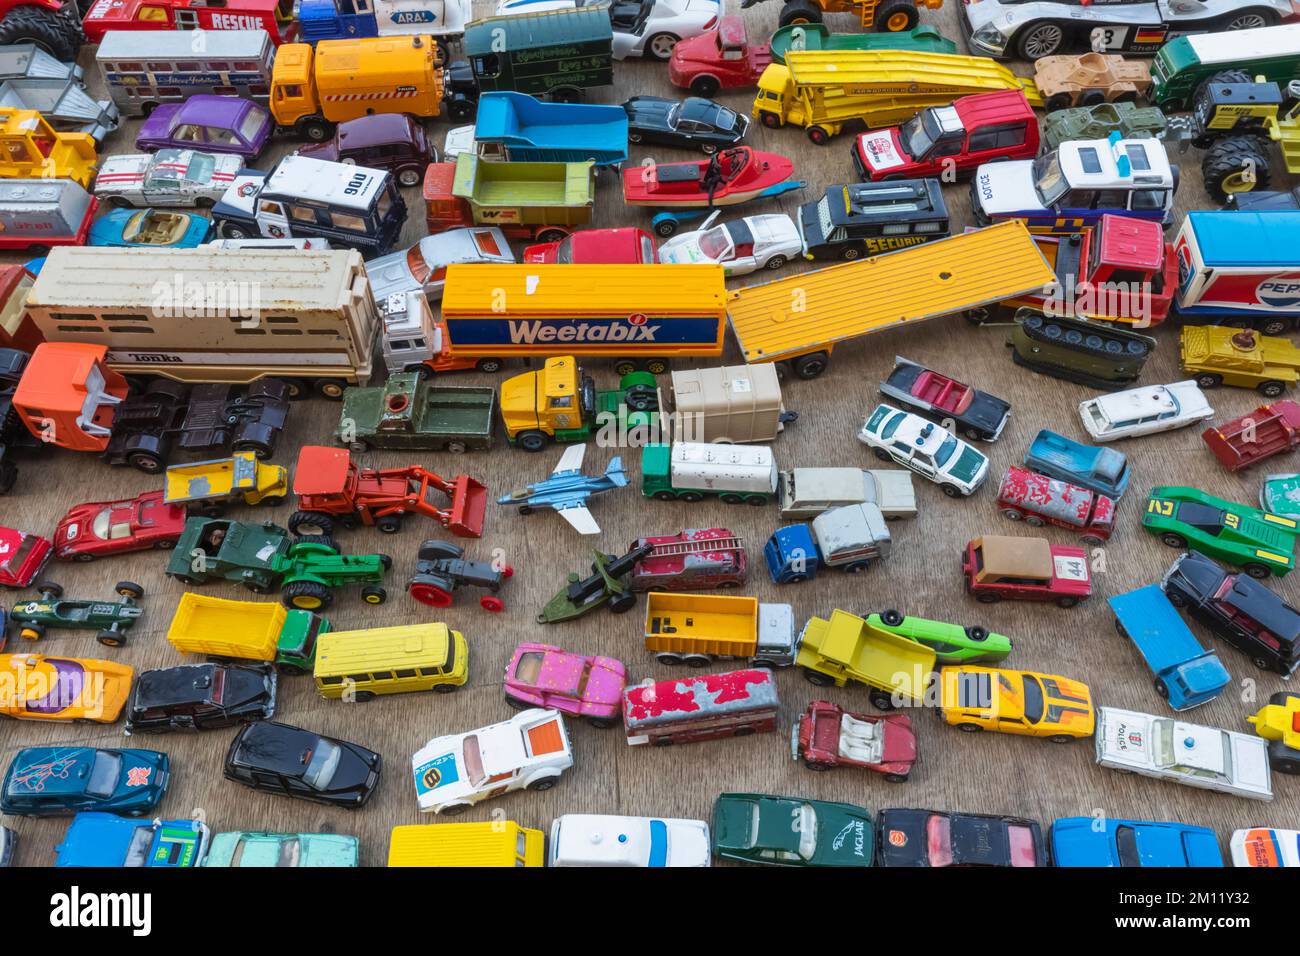 England, Dorset, Bridport, Bridport Market, Display of Vintage Collectable Toy Cars and Trucks Stock Photo